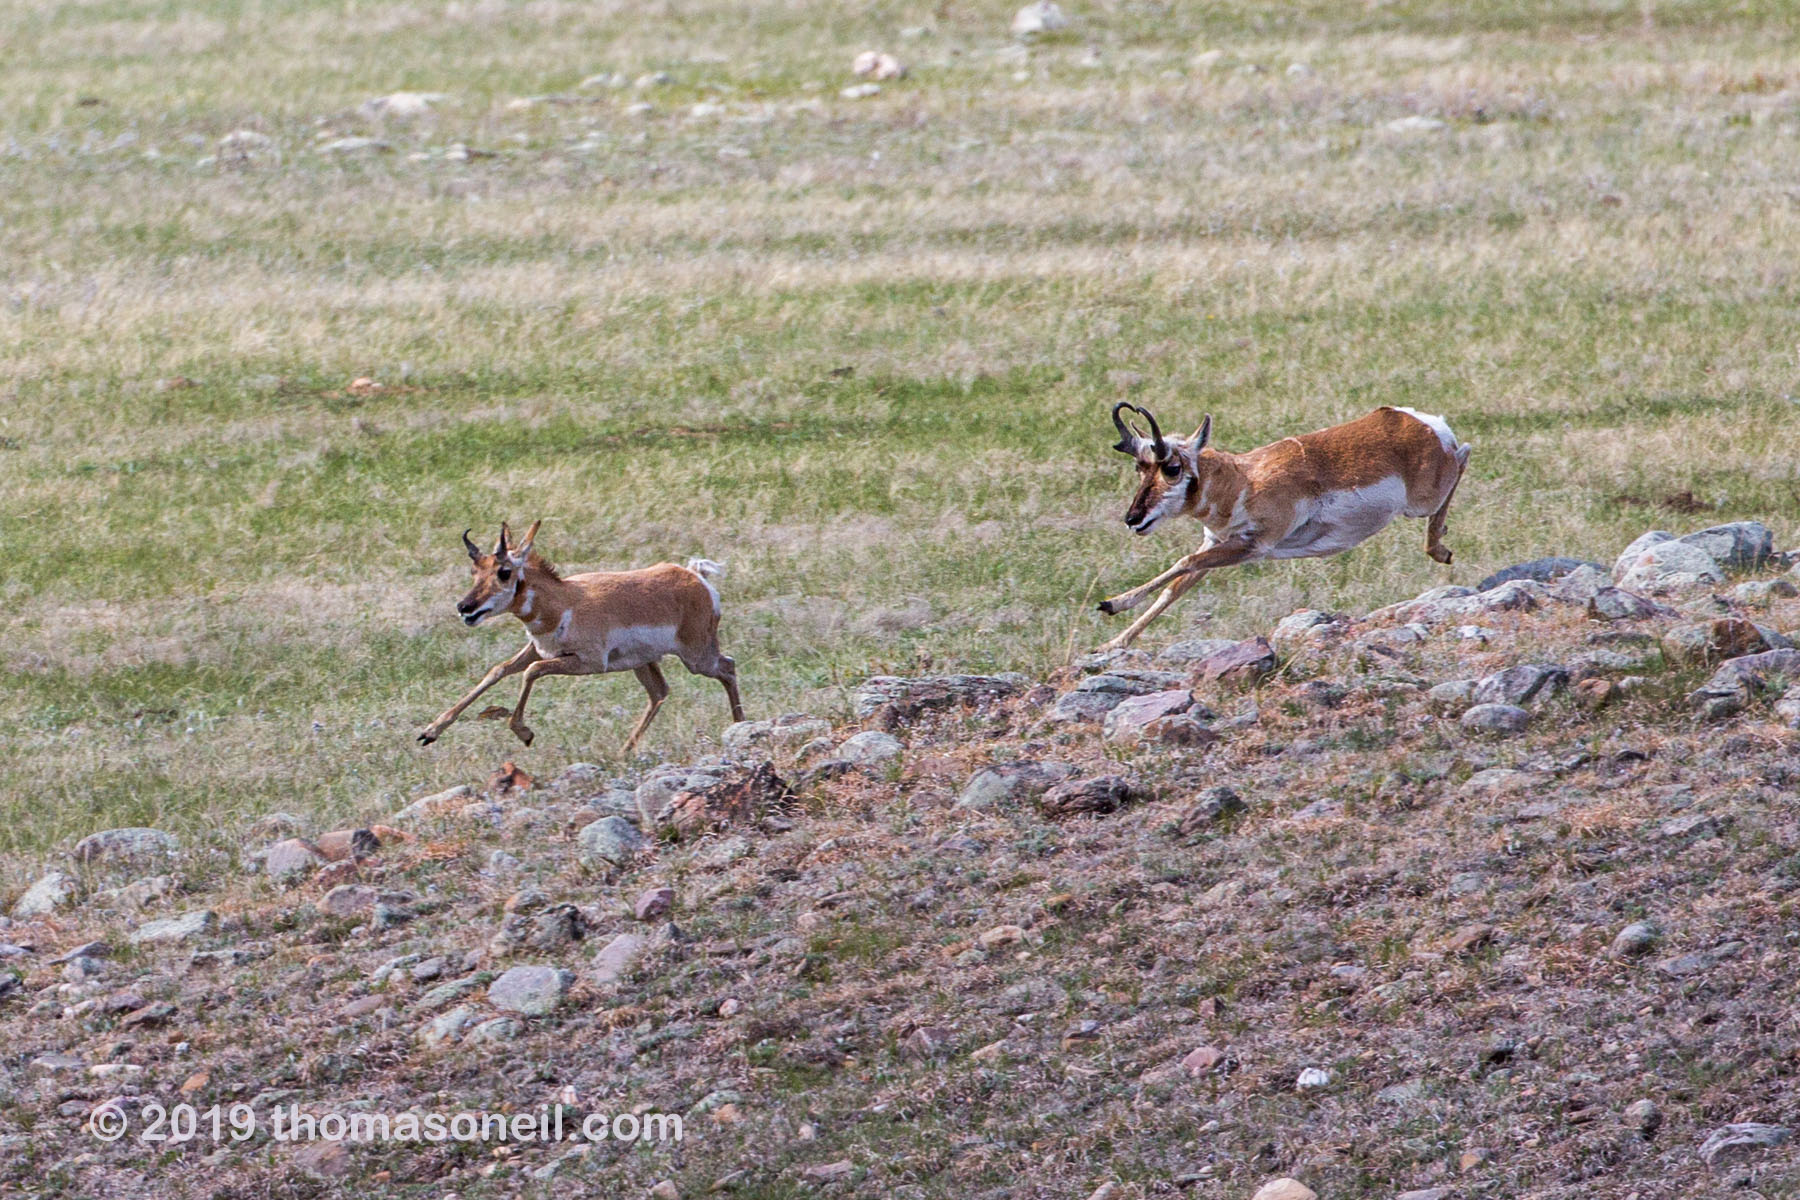 The old pronghorn buck chases a member of its herd, Custer State Park, May 2019.  Click for next photo.